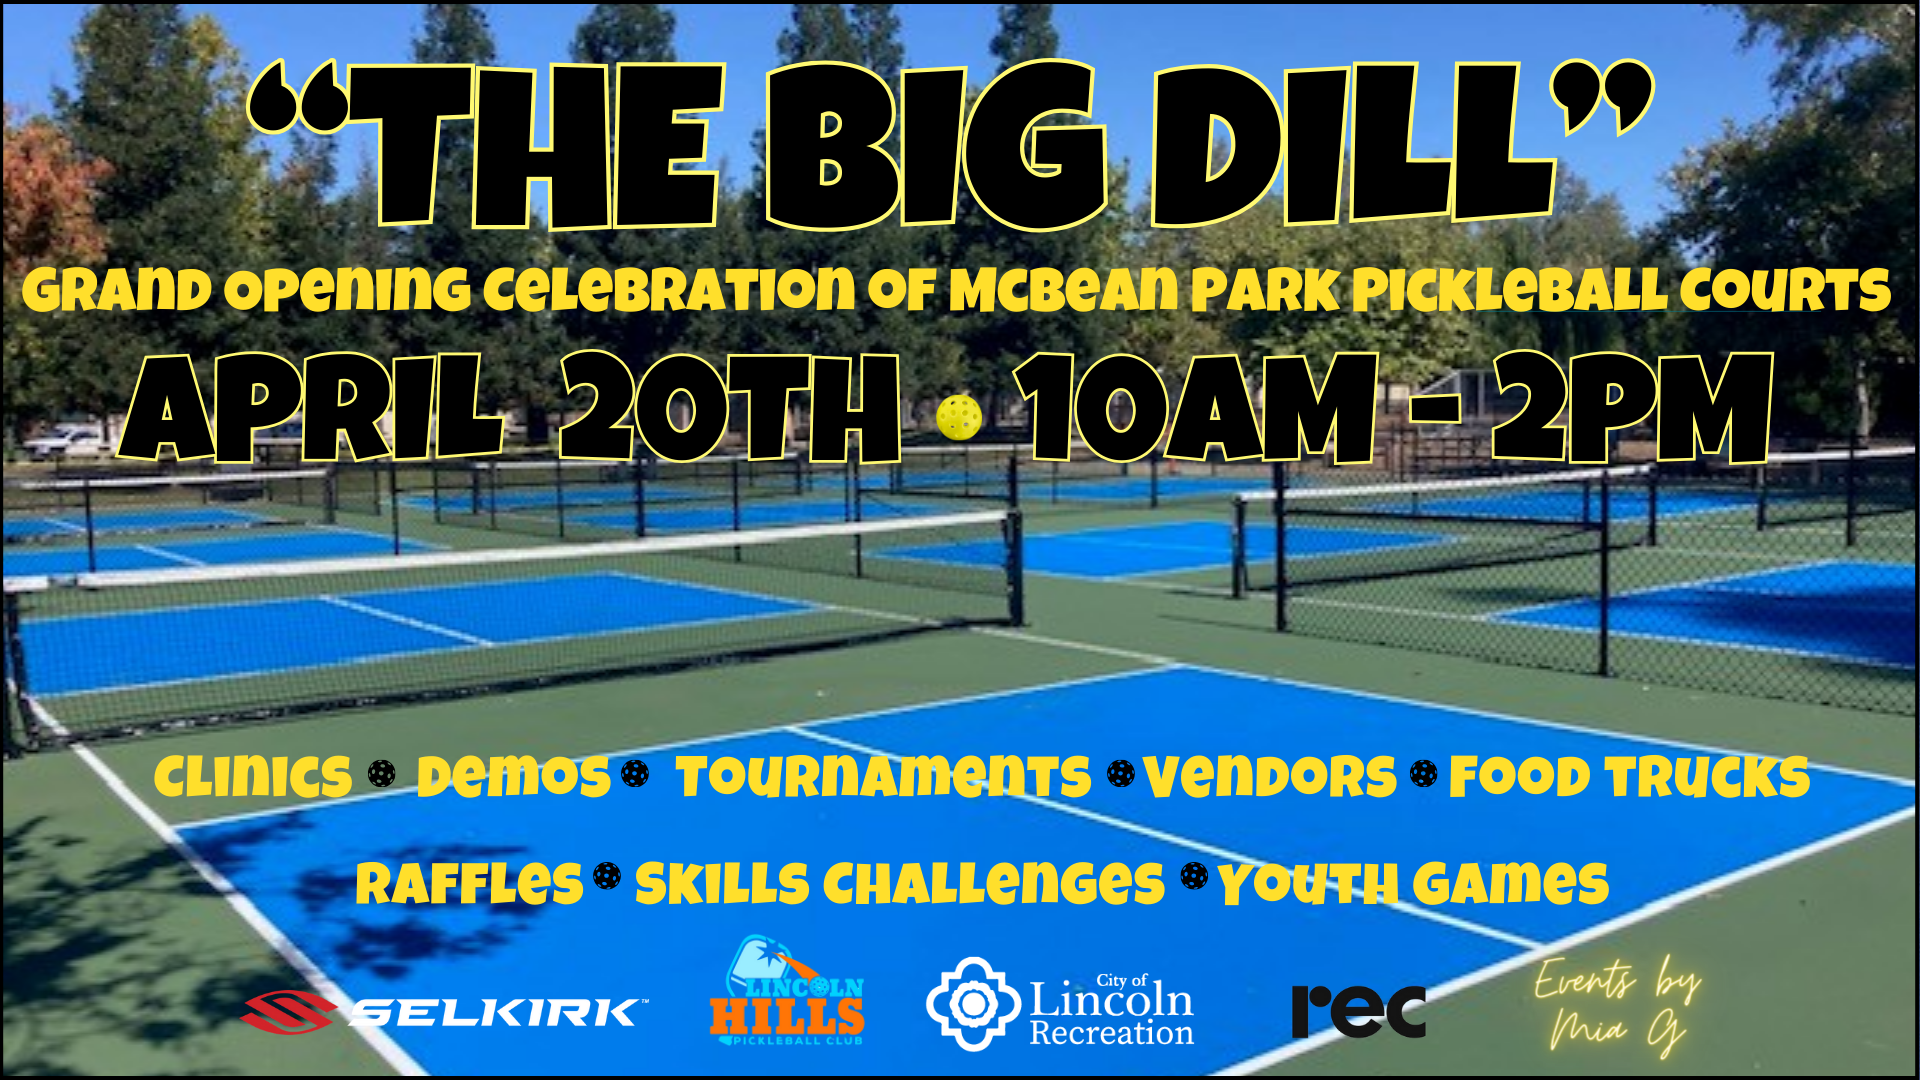 Image of pickleball courts with grand opening information